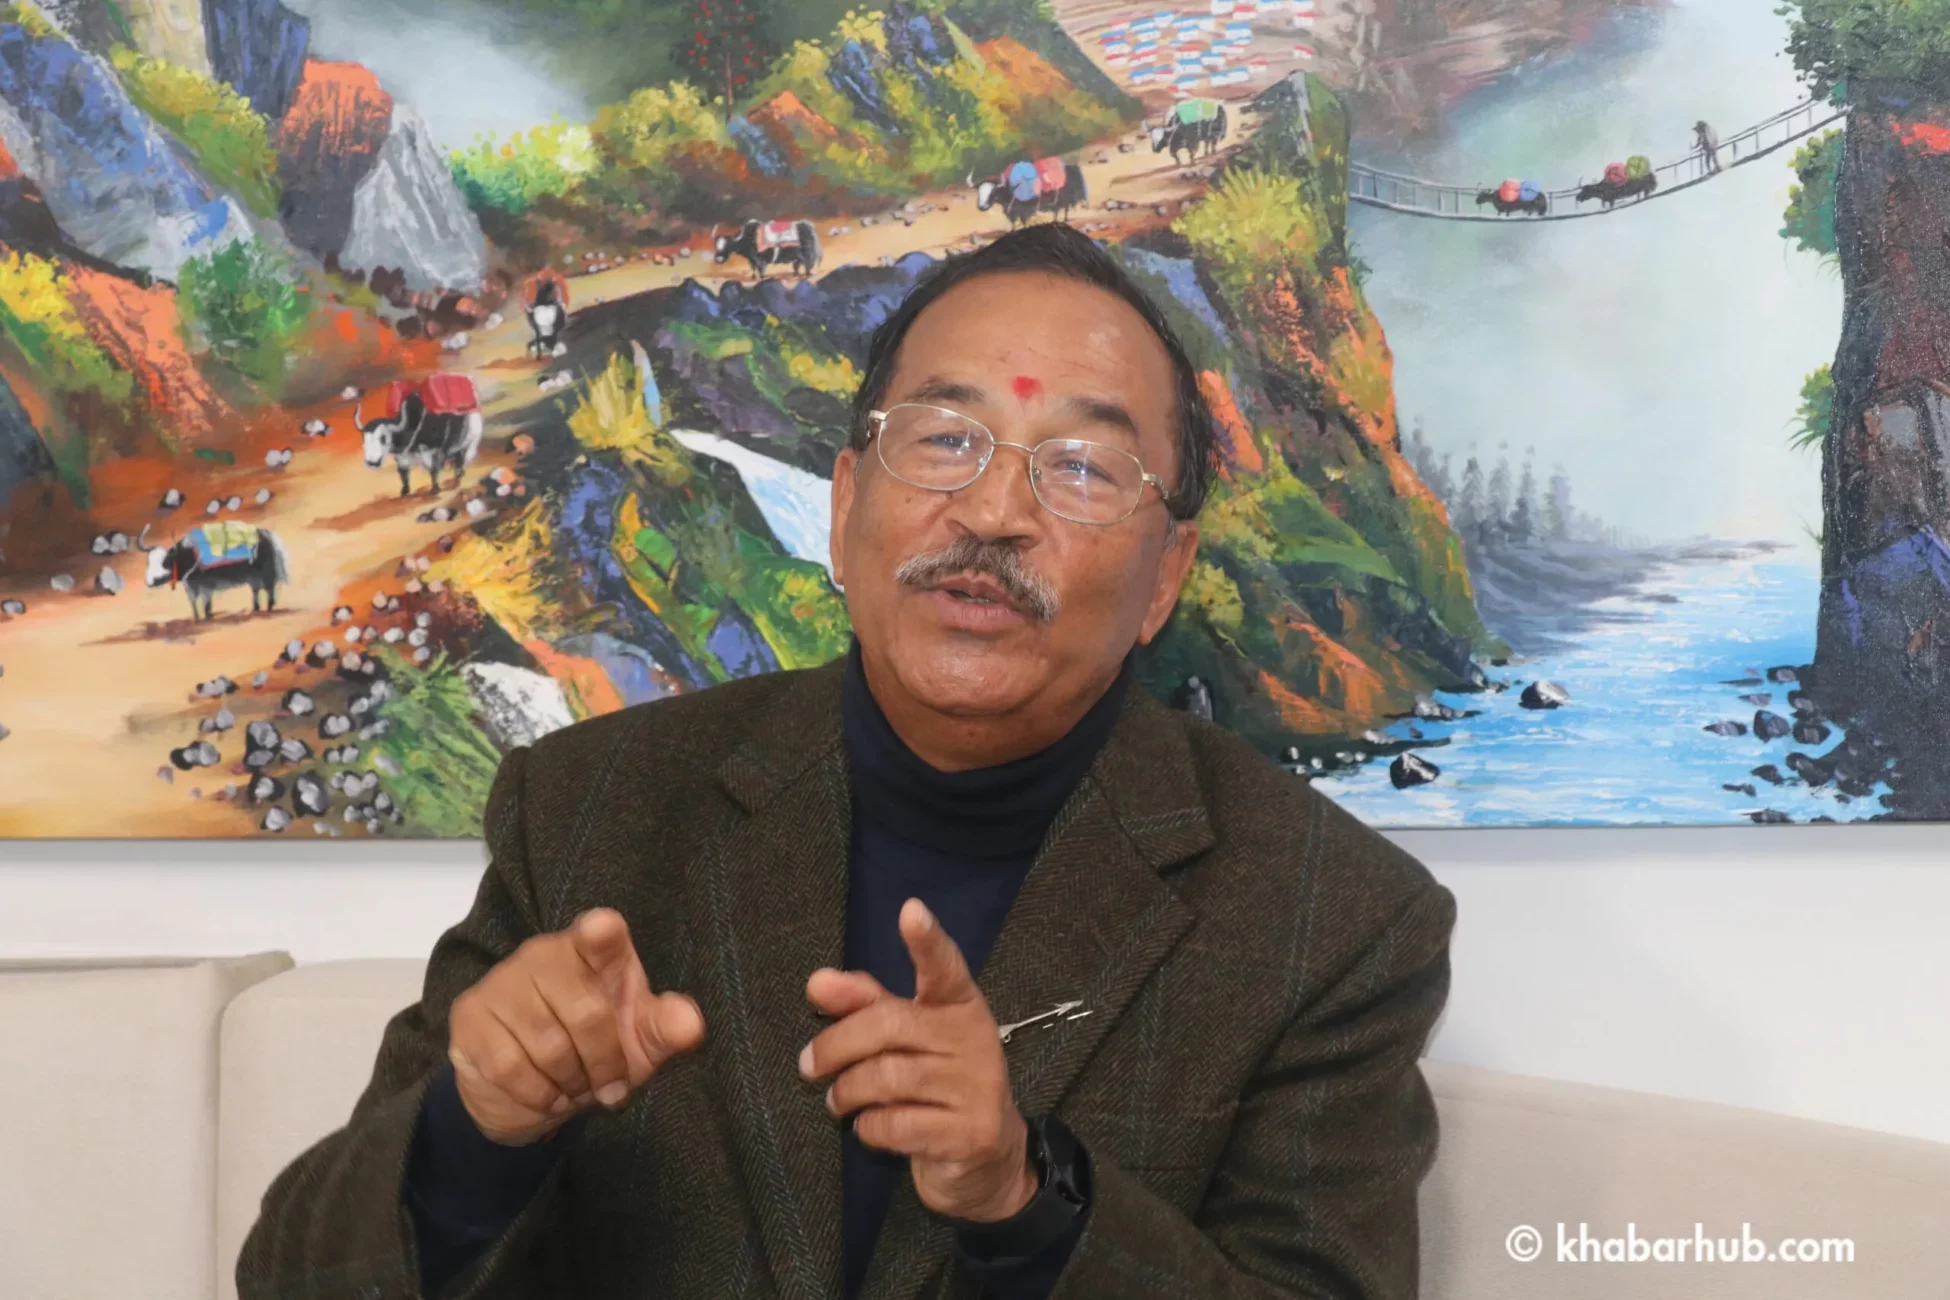 We envision a king operating within constitutional bounds: Kamal Thapa